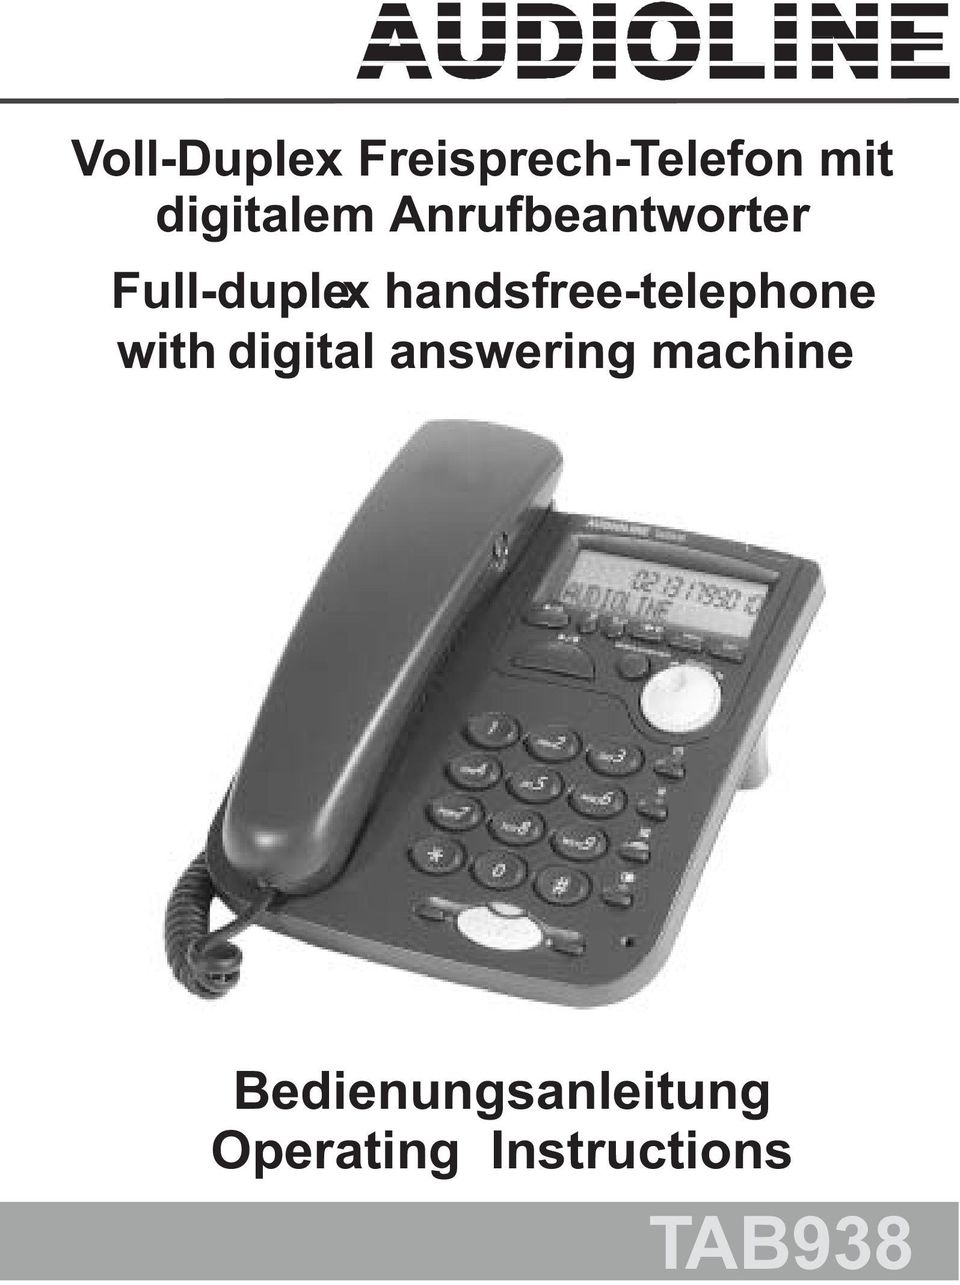 handsfree-telephone with digital answering